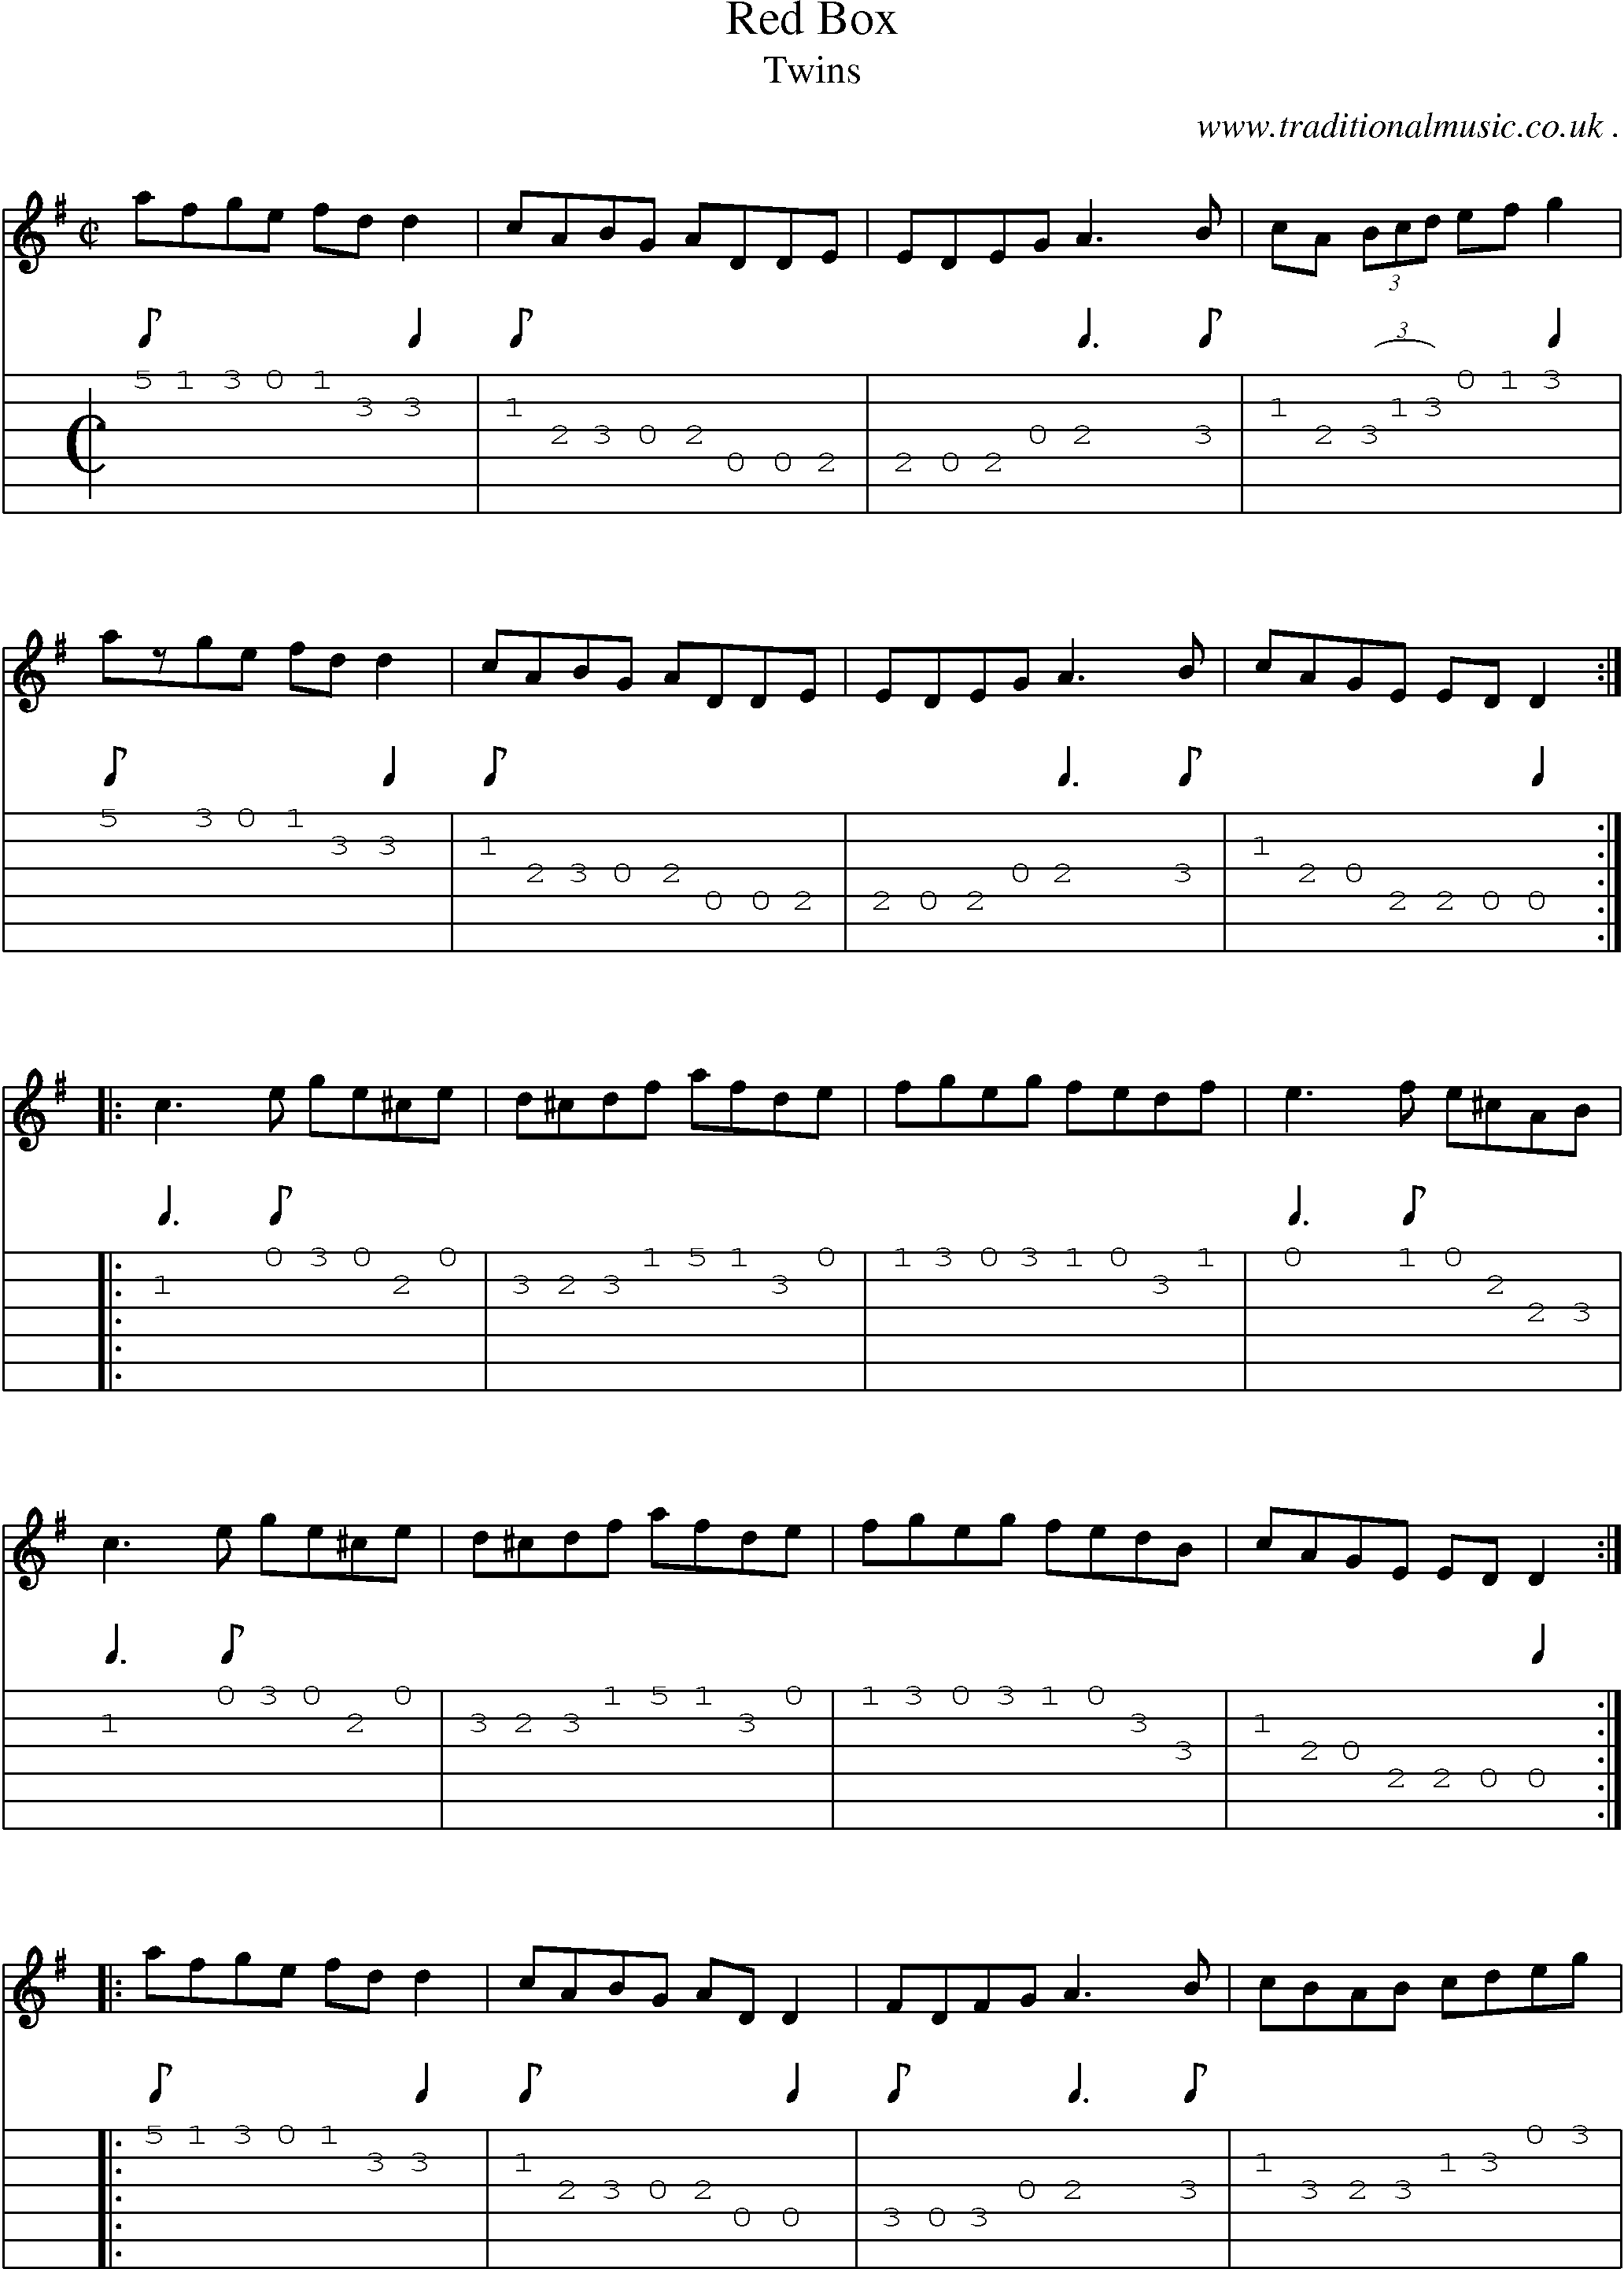 Sheet-Music and Guitar Tabs for Red Box